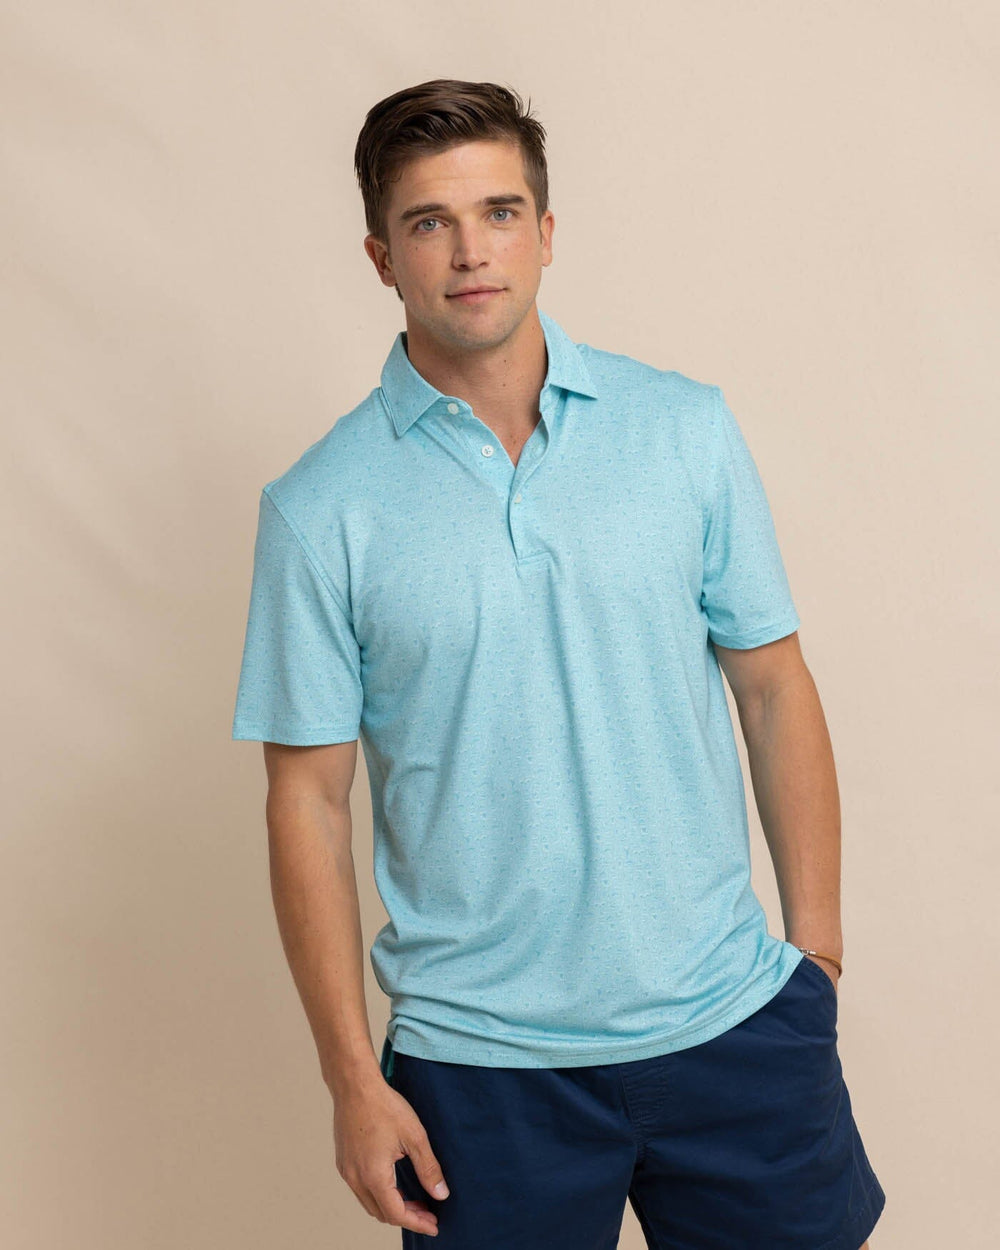 The front view of the Southern Tide Driver Let's Go Clubbing Printed Polo by Southern Tide - Ocean Aqua